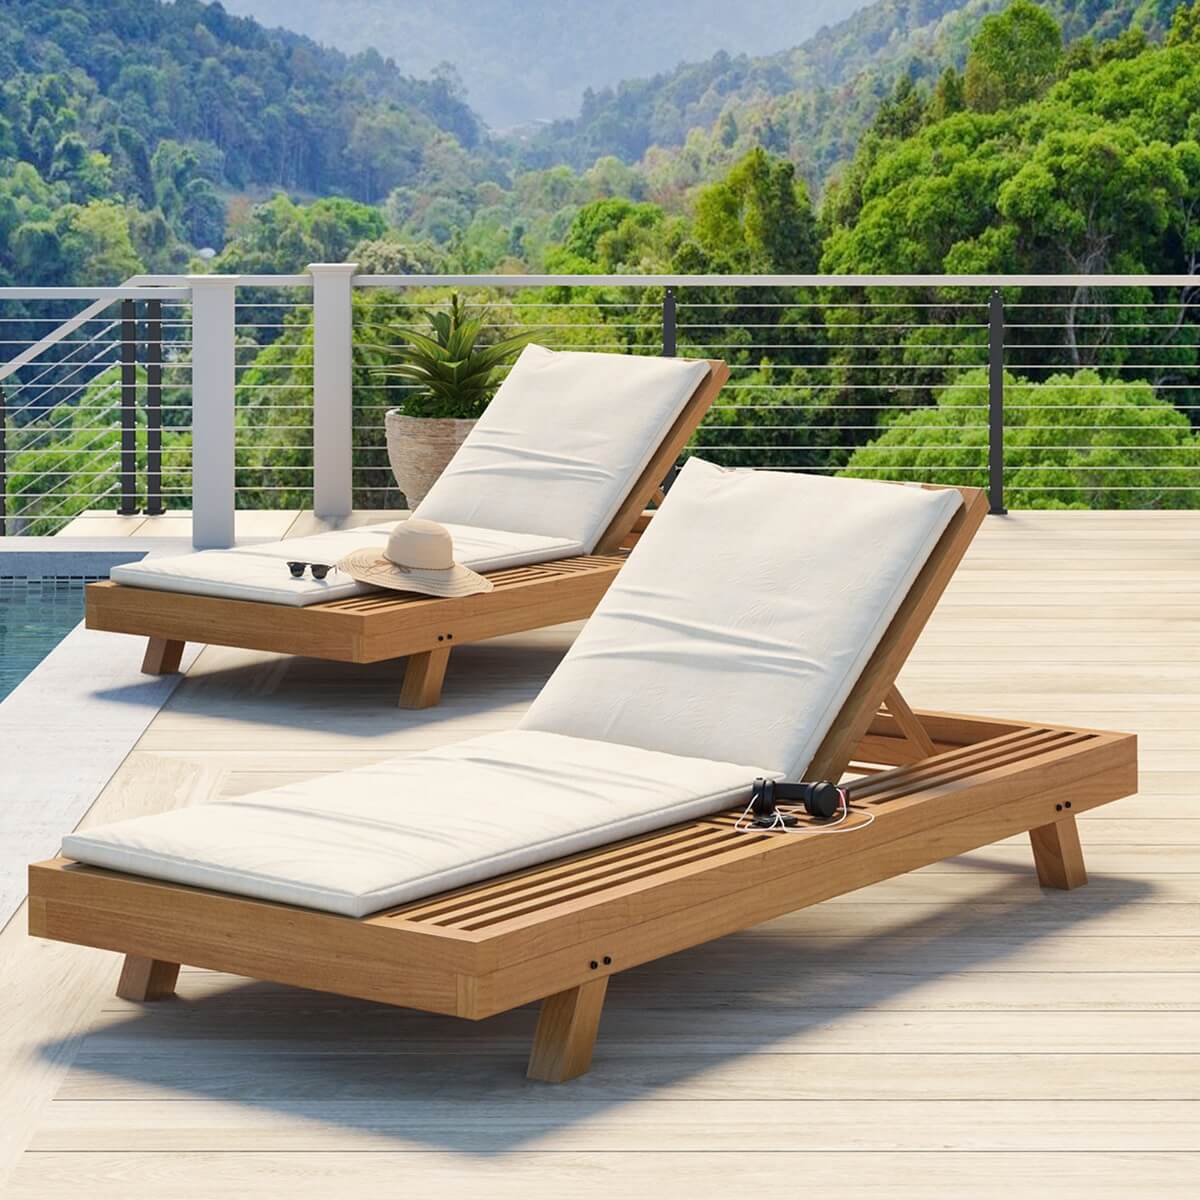 https://www.sierralivingconcepts.com/images/thumbs/0407900_rustic-teak-wood-outdoor-chaise-lounge-chair-w-adjustable-backrest.jpeg